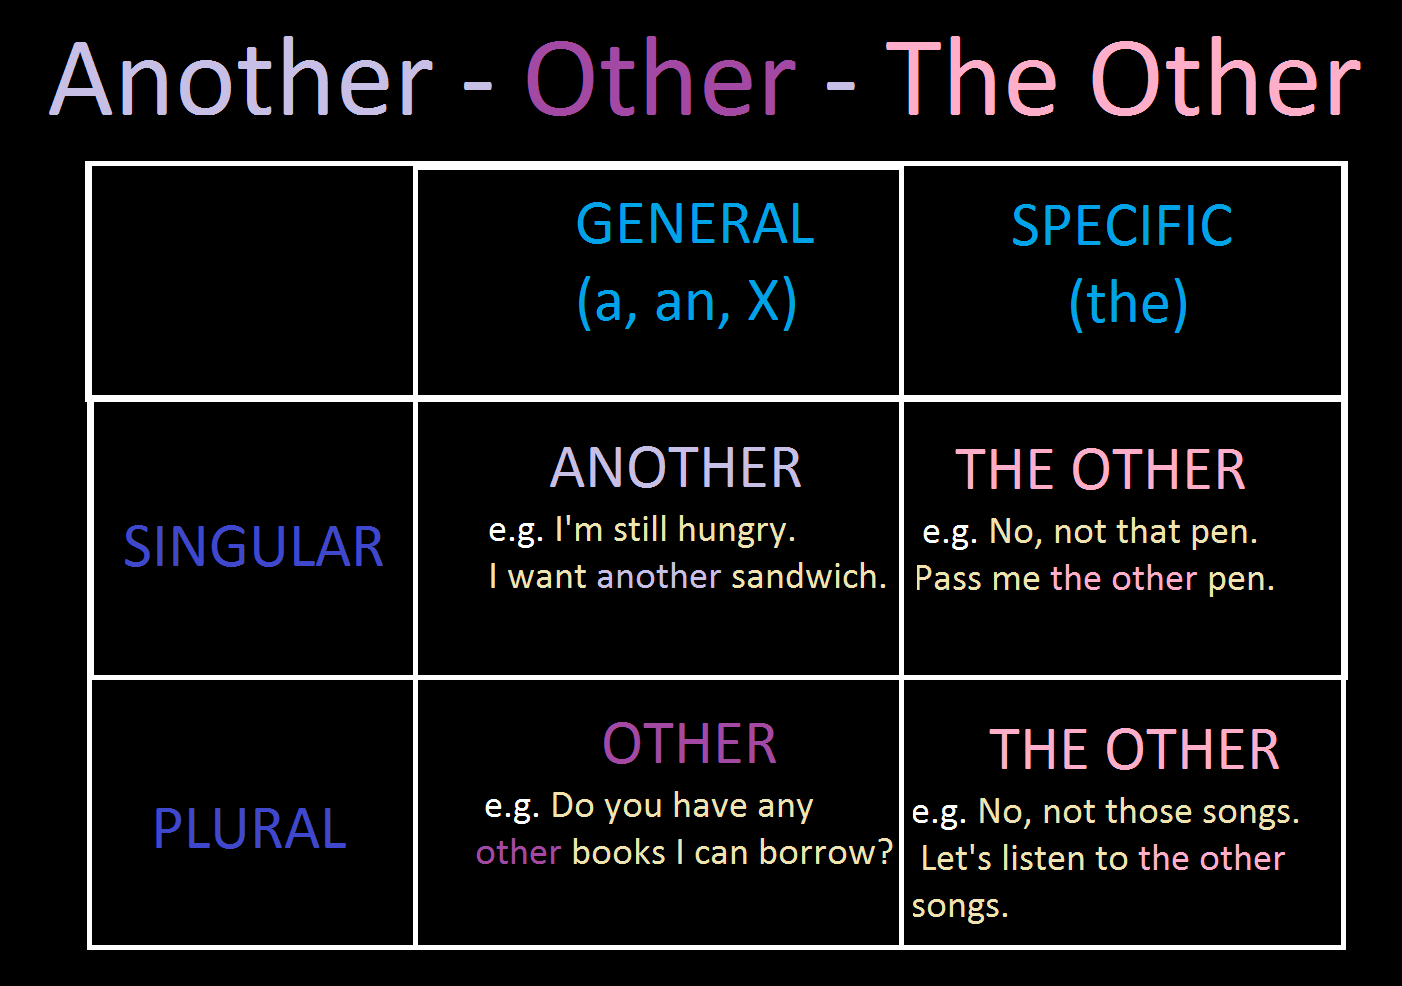 Another – Other – Others